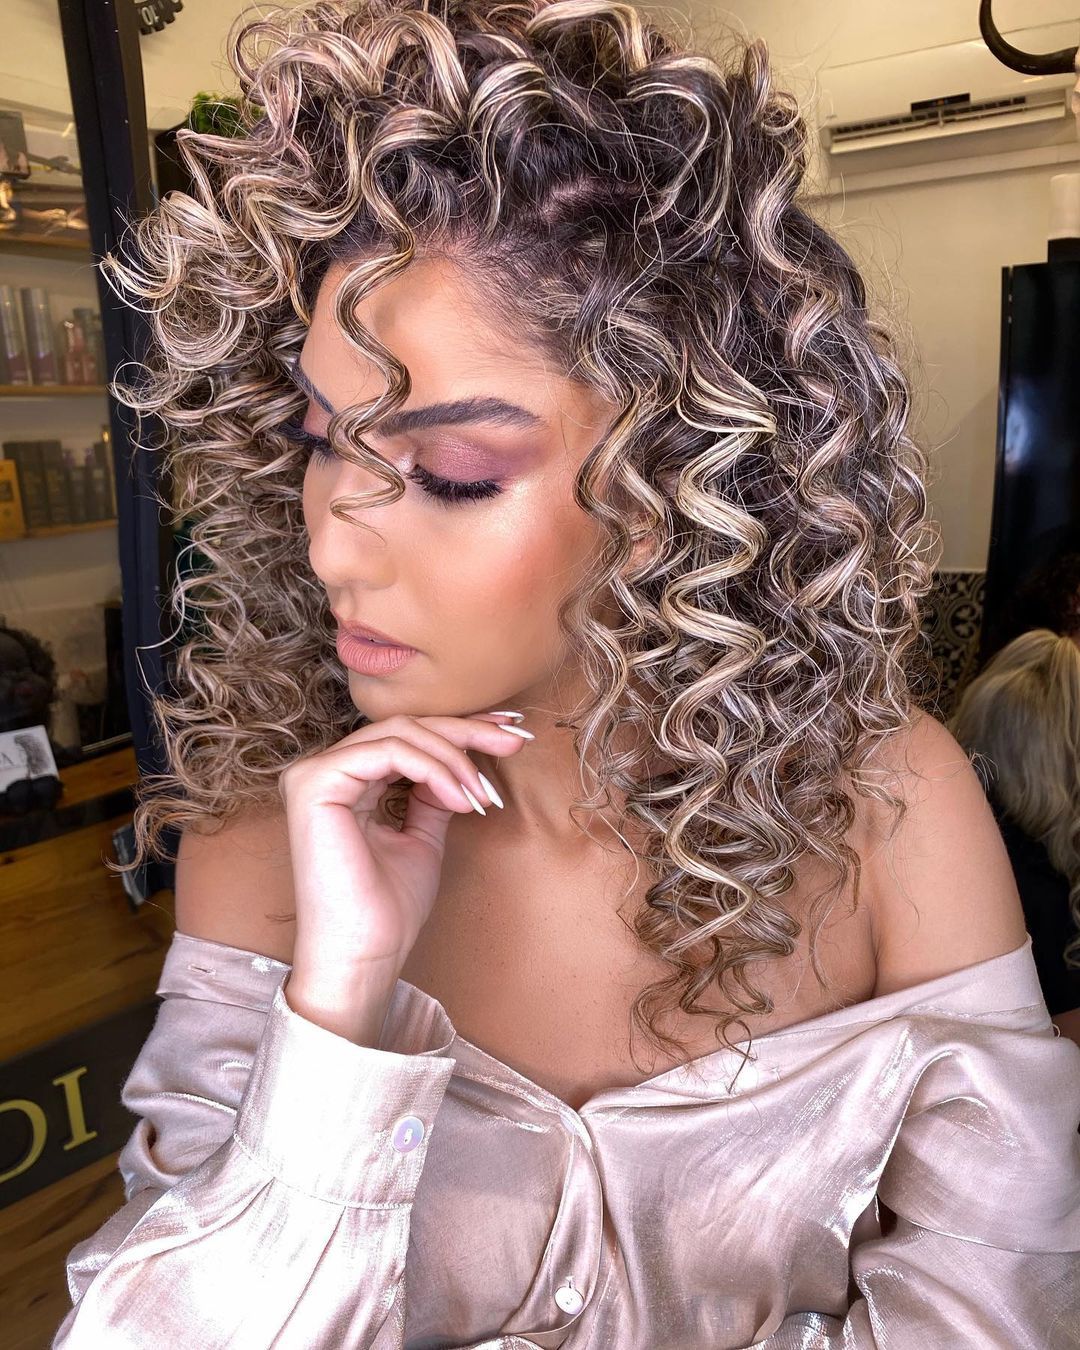 Curly Hairstyles Summer 2023 15 Ideas